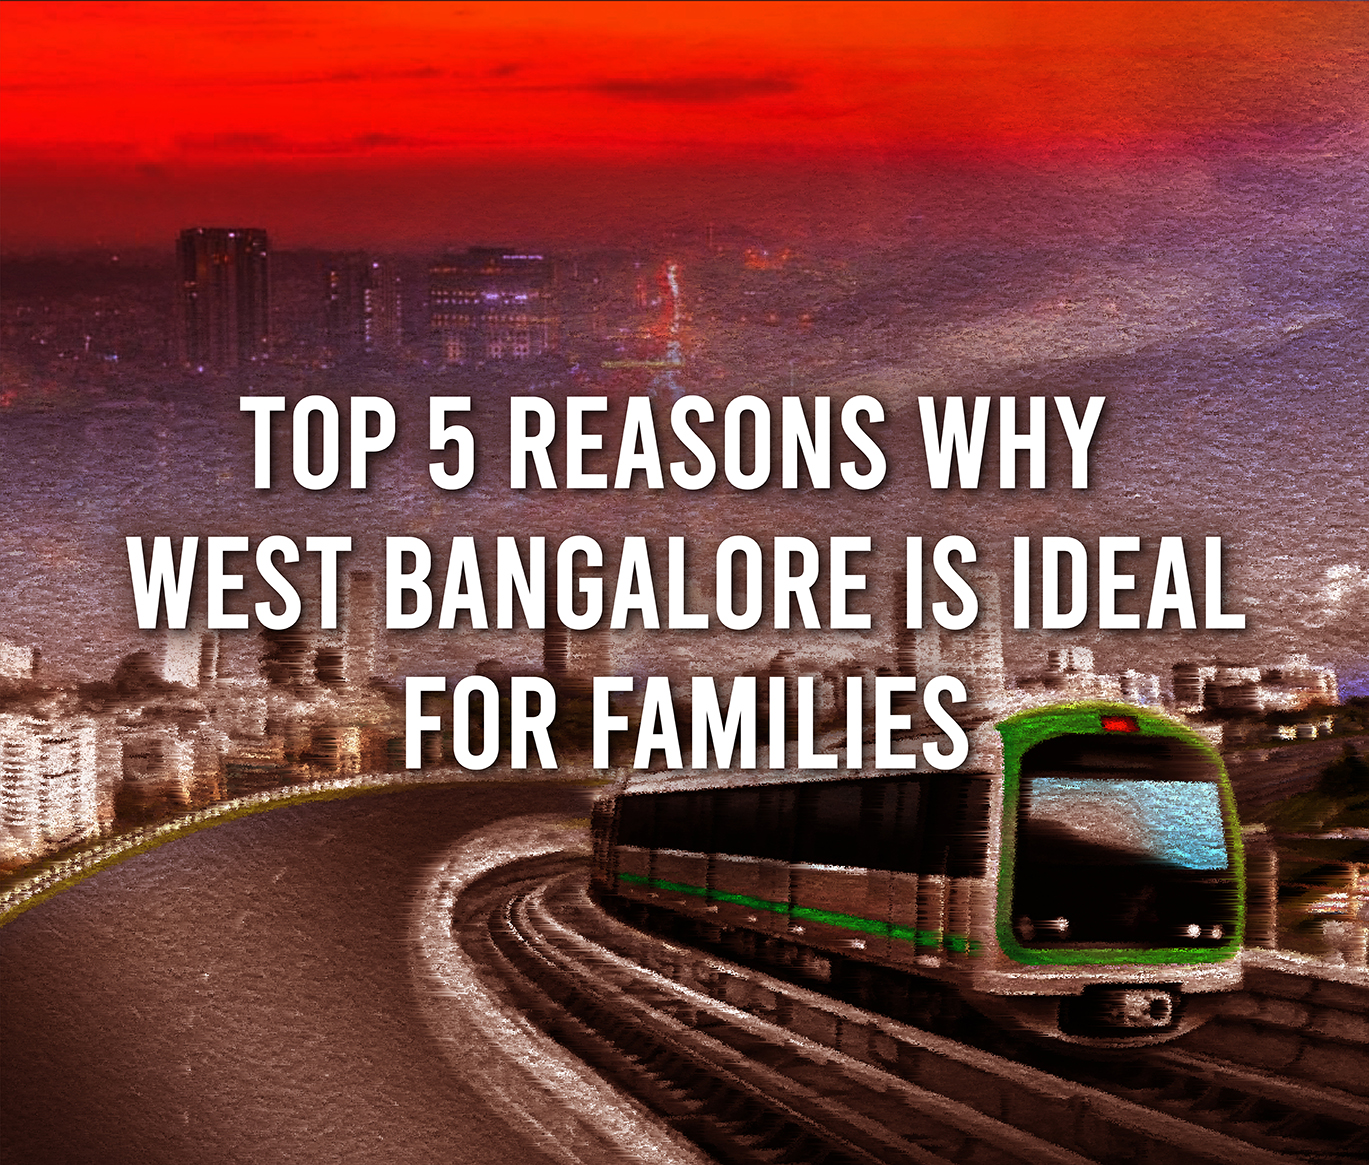 Top 5 Reasons Why West Bangalore is Ideal for Families